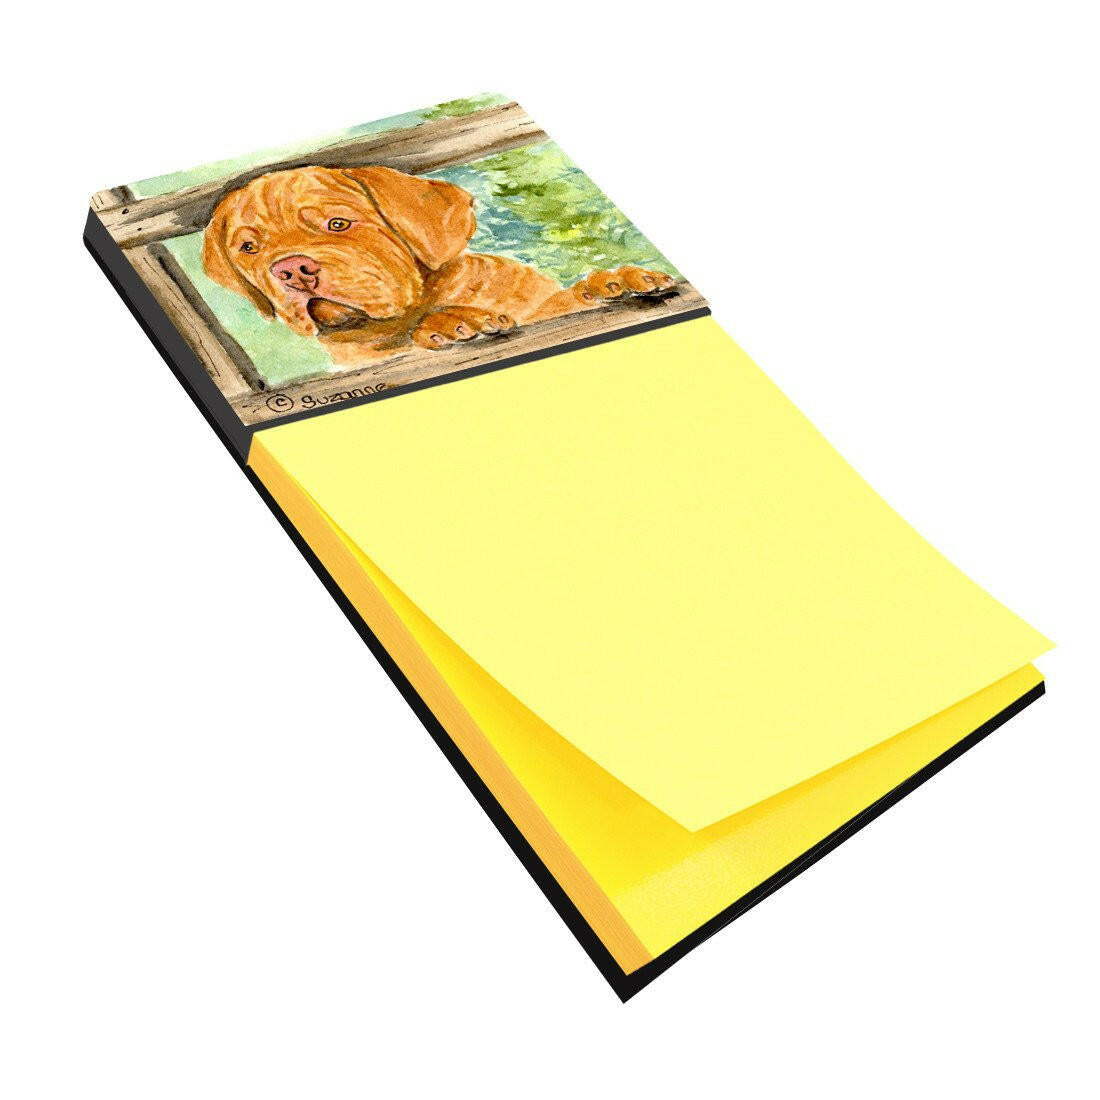 Dogue de Bordeaux Refiillable Sticky Note Holder or Postit Note Dispenser SS8926SN by Caroline's Treasures